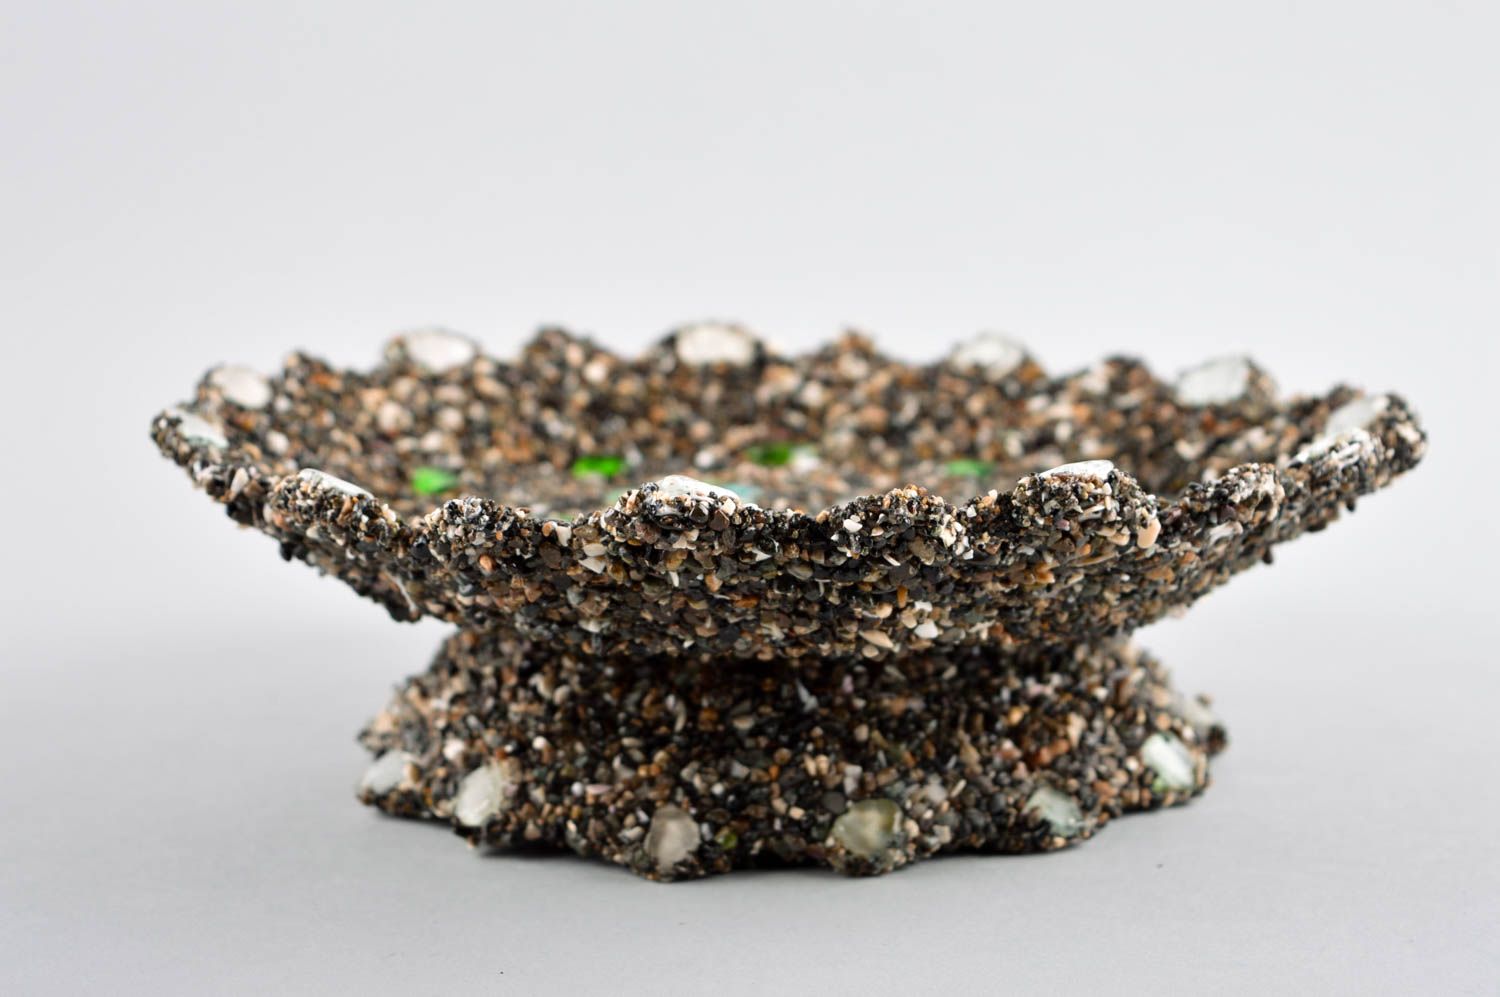 Round candy bowl 9 inches wide made of cardboard covered with sea pebbles 1,26 lb photo 1